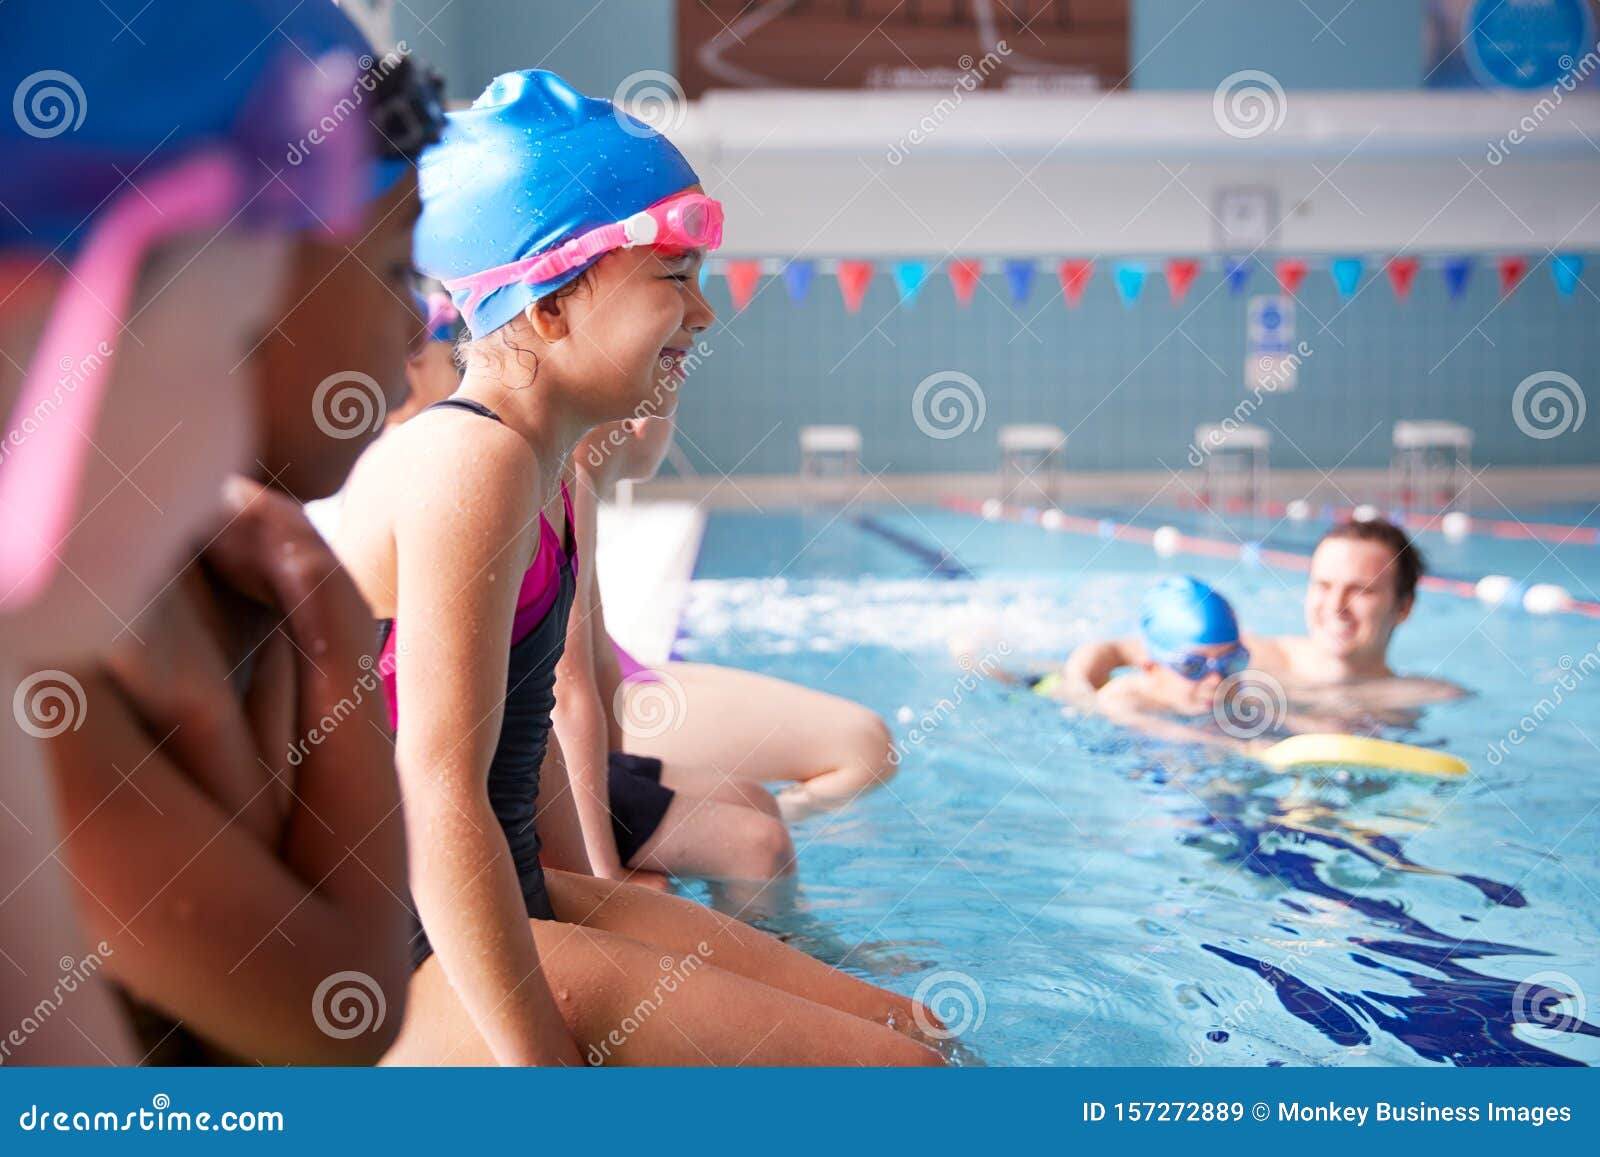 male coach in water giving group of children swimming lesson in indoor pool